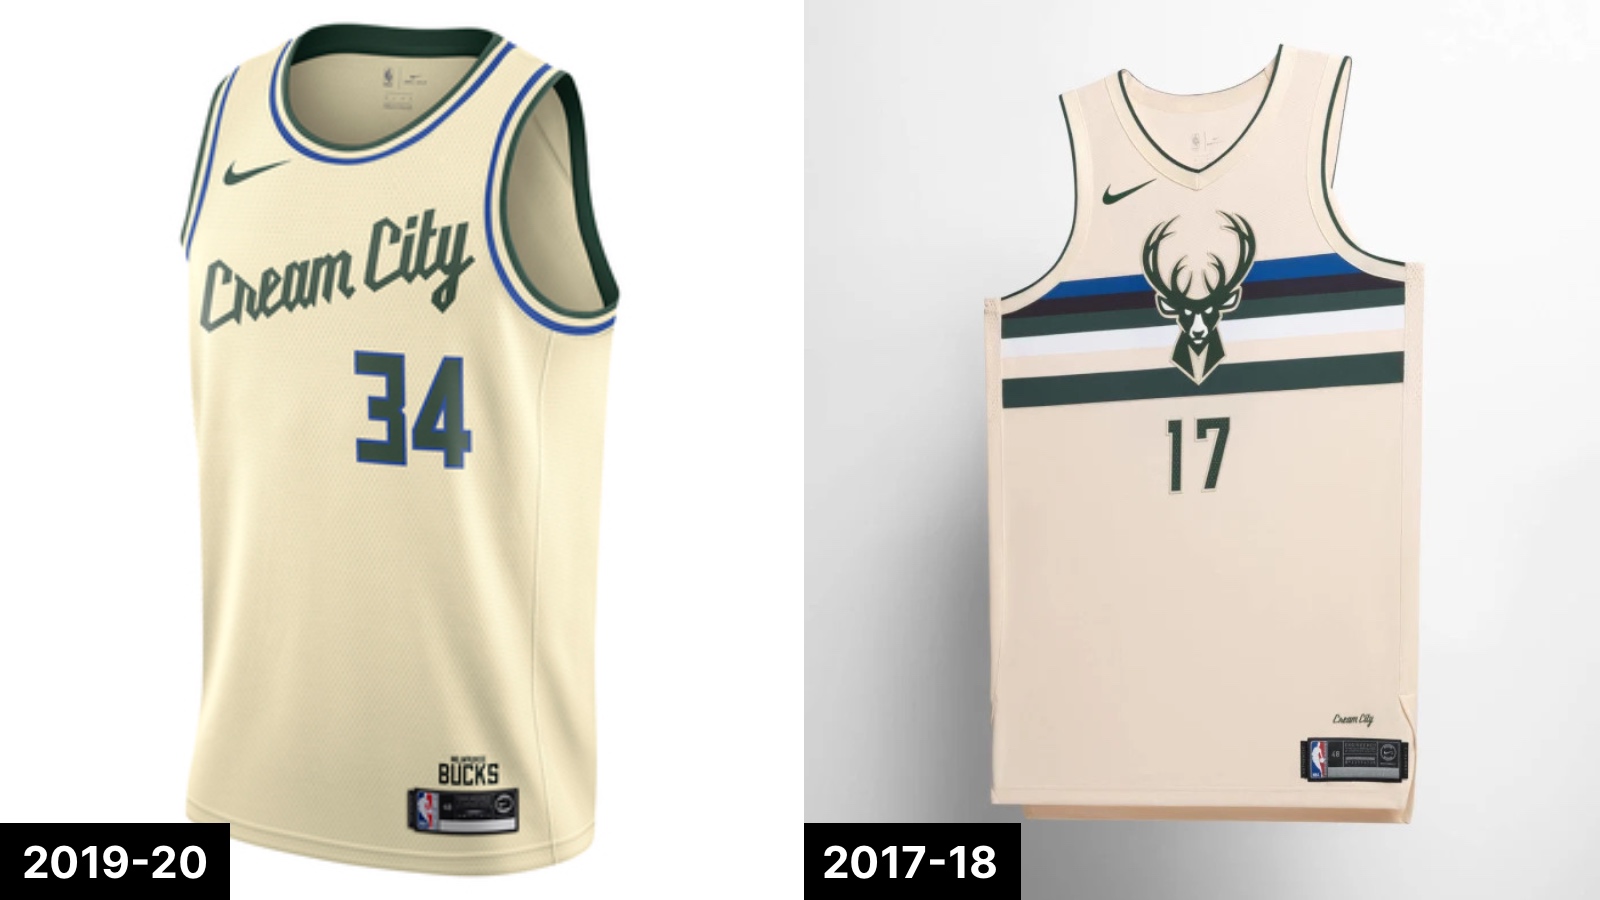 The NBA has banned all cream colored jerseys